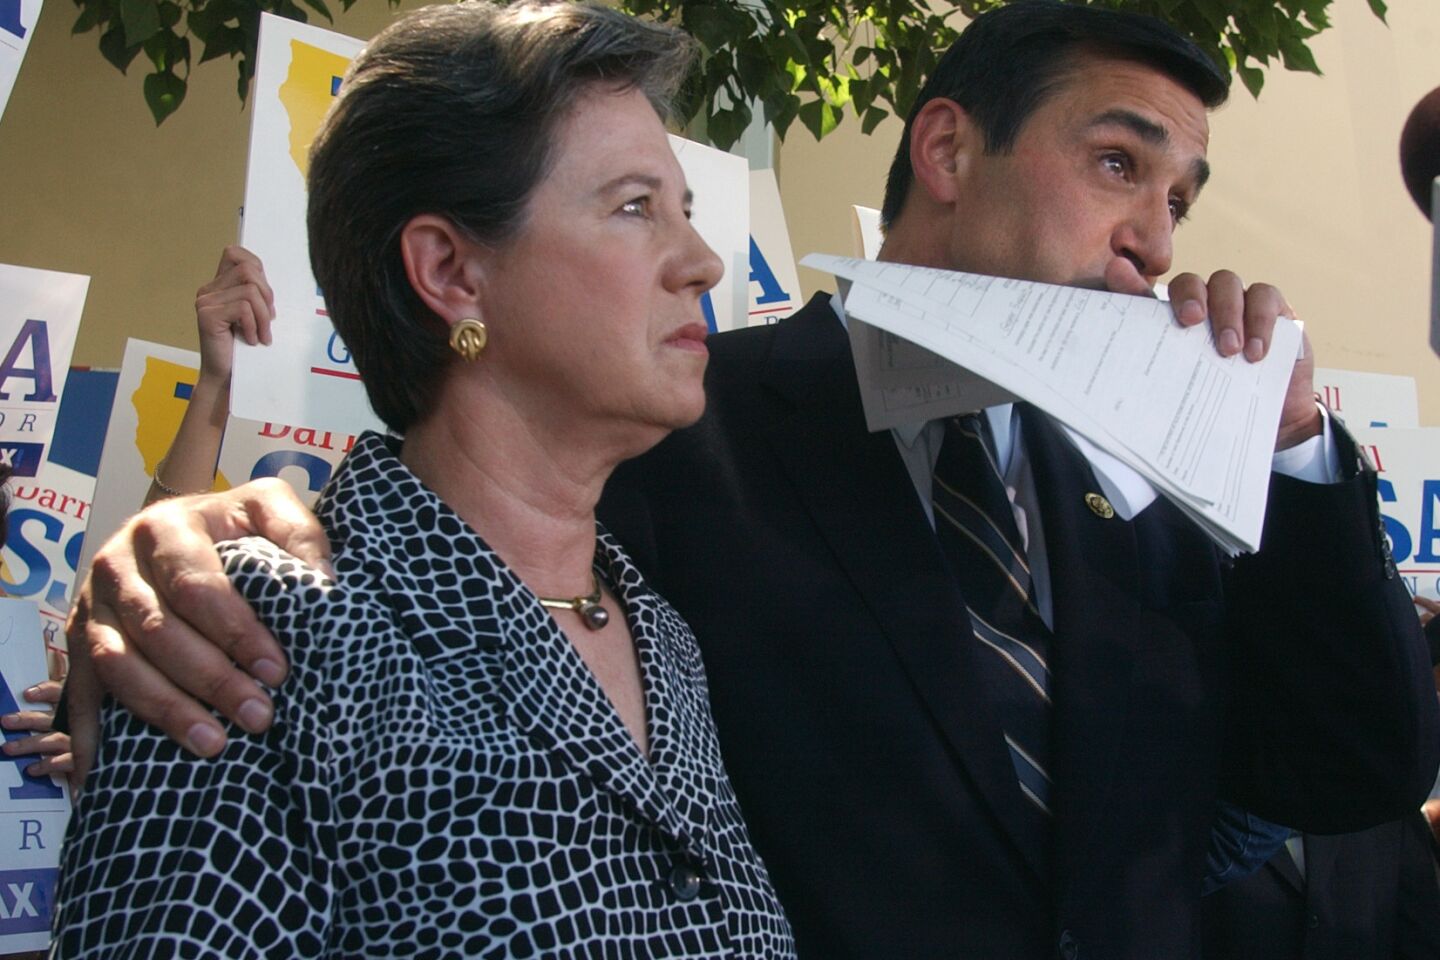 Rep. Darrell Issa, with his wife, Kathy, choked up on Aug. 7, 2003, as he announced he would not be a candidate for governor. Issa bankrolled the successful petition drive to recall Democratic Gov. Gray Davis.